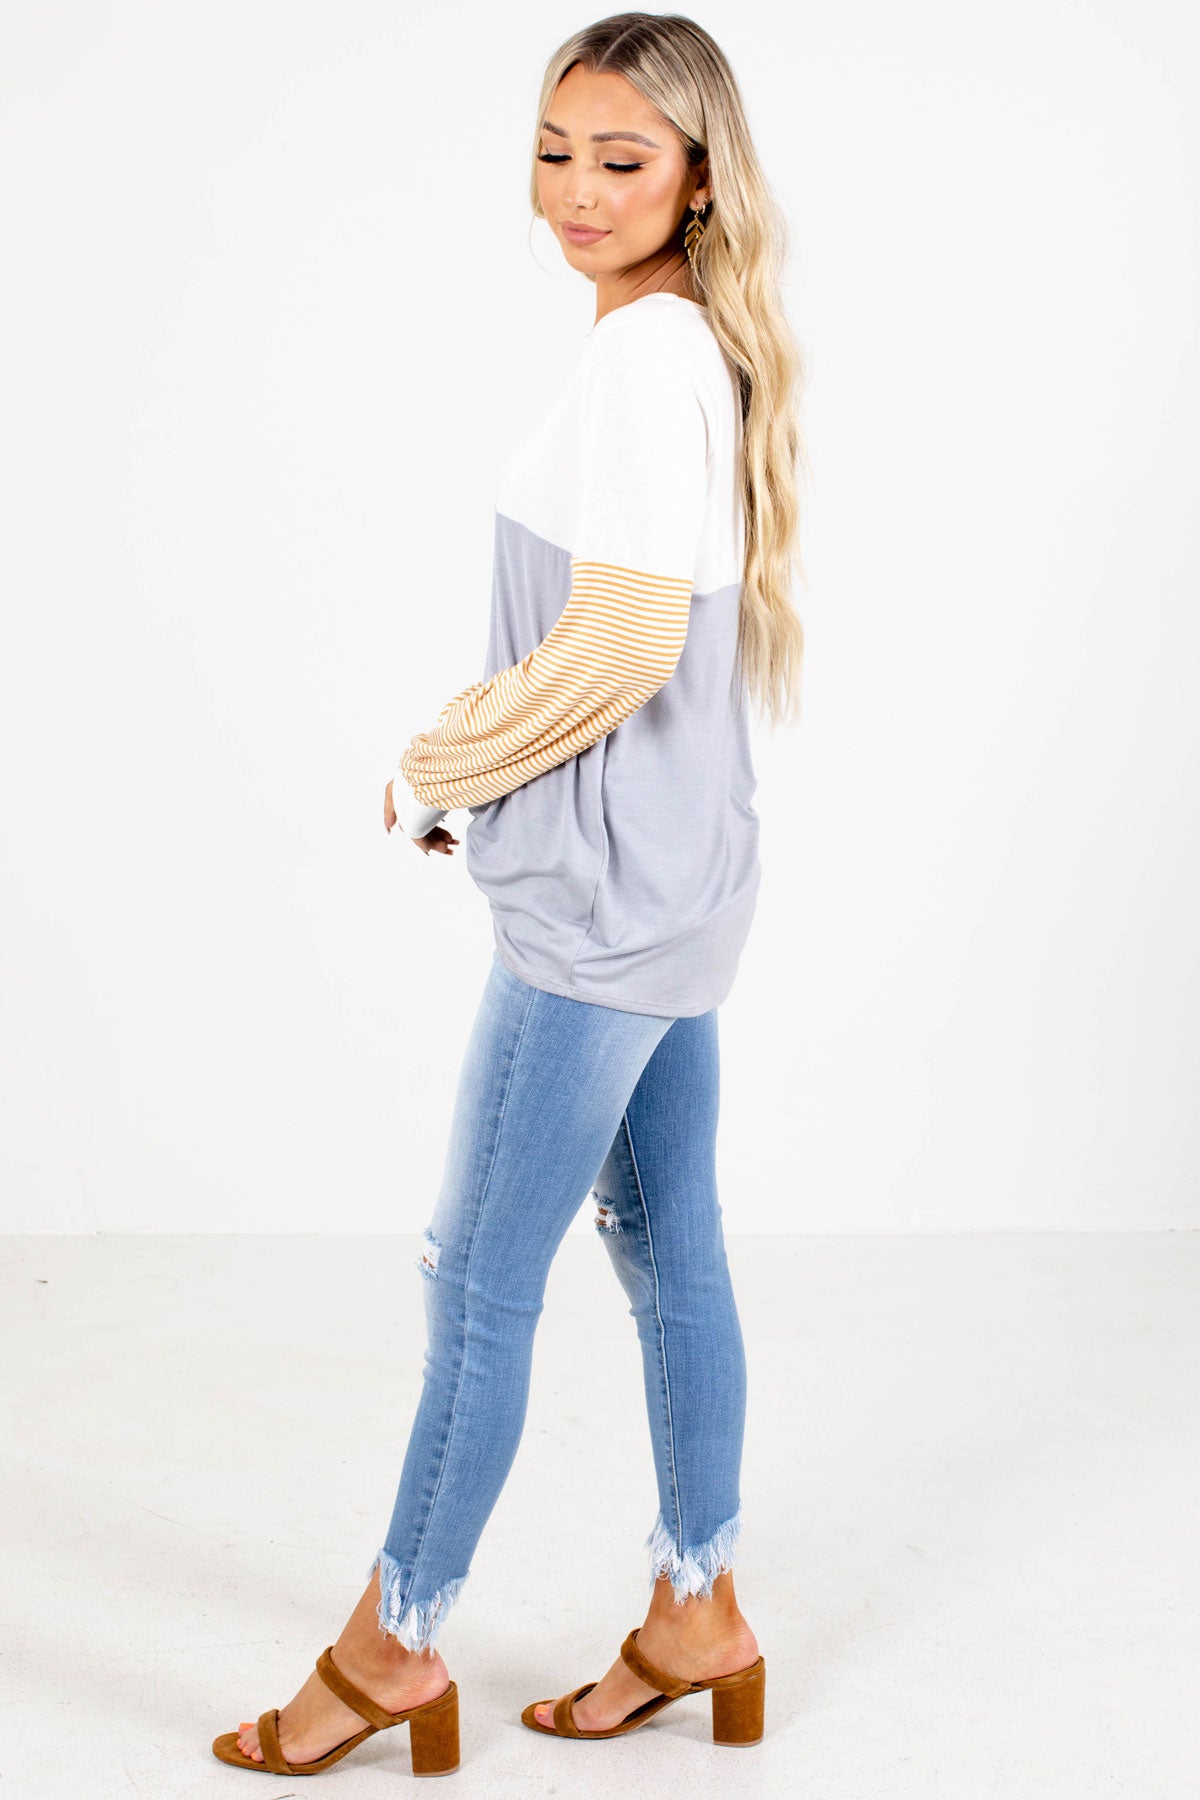 Gray, Yellow, and White Colorblock Long Sleeve Top